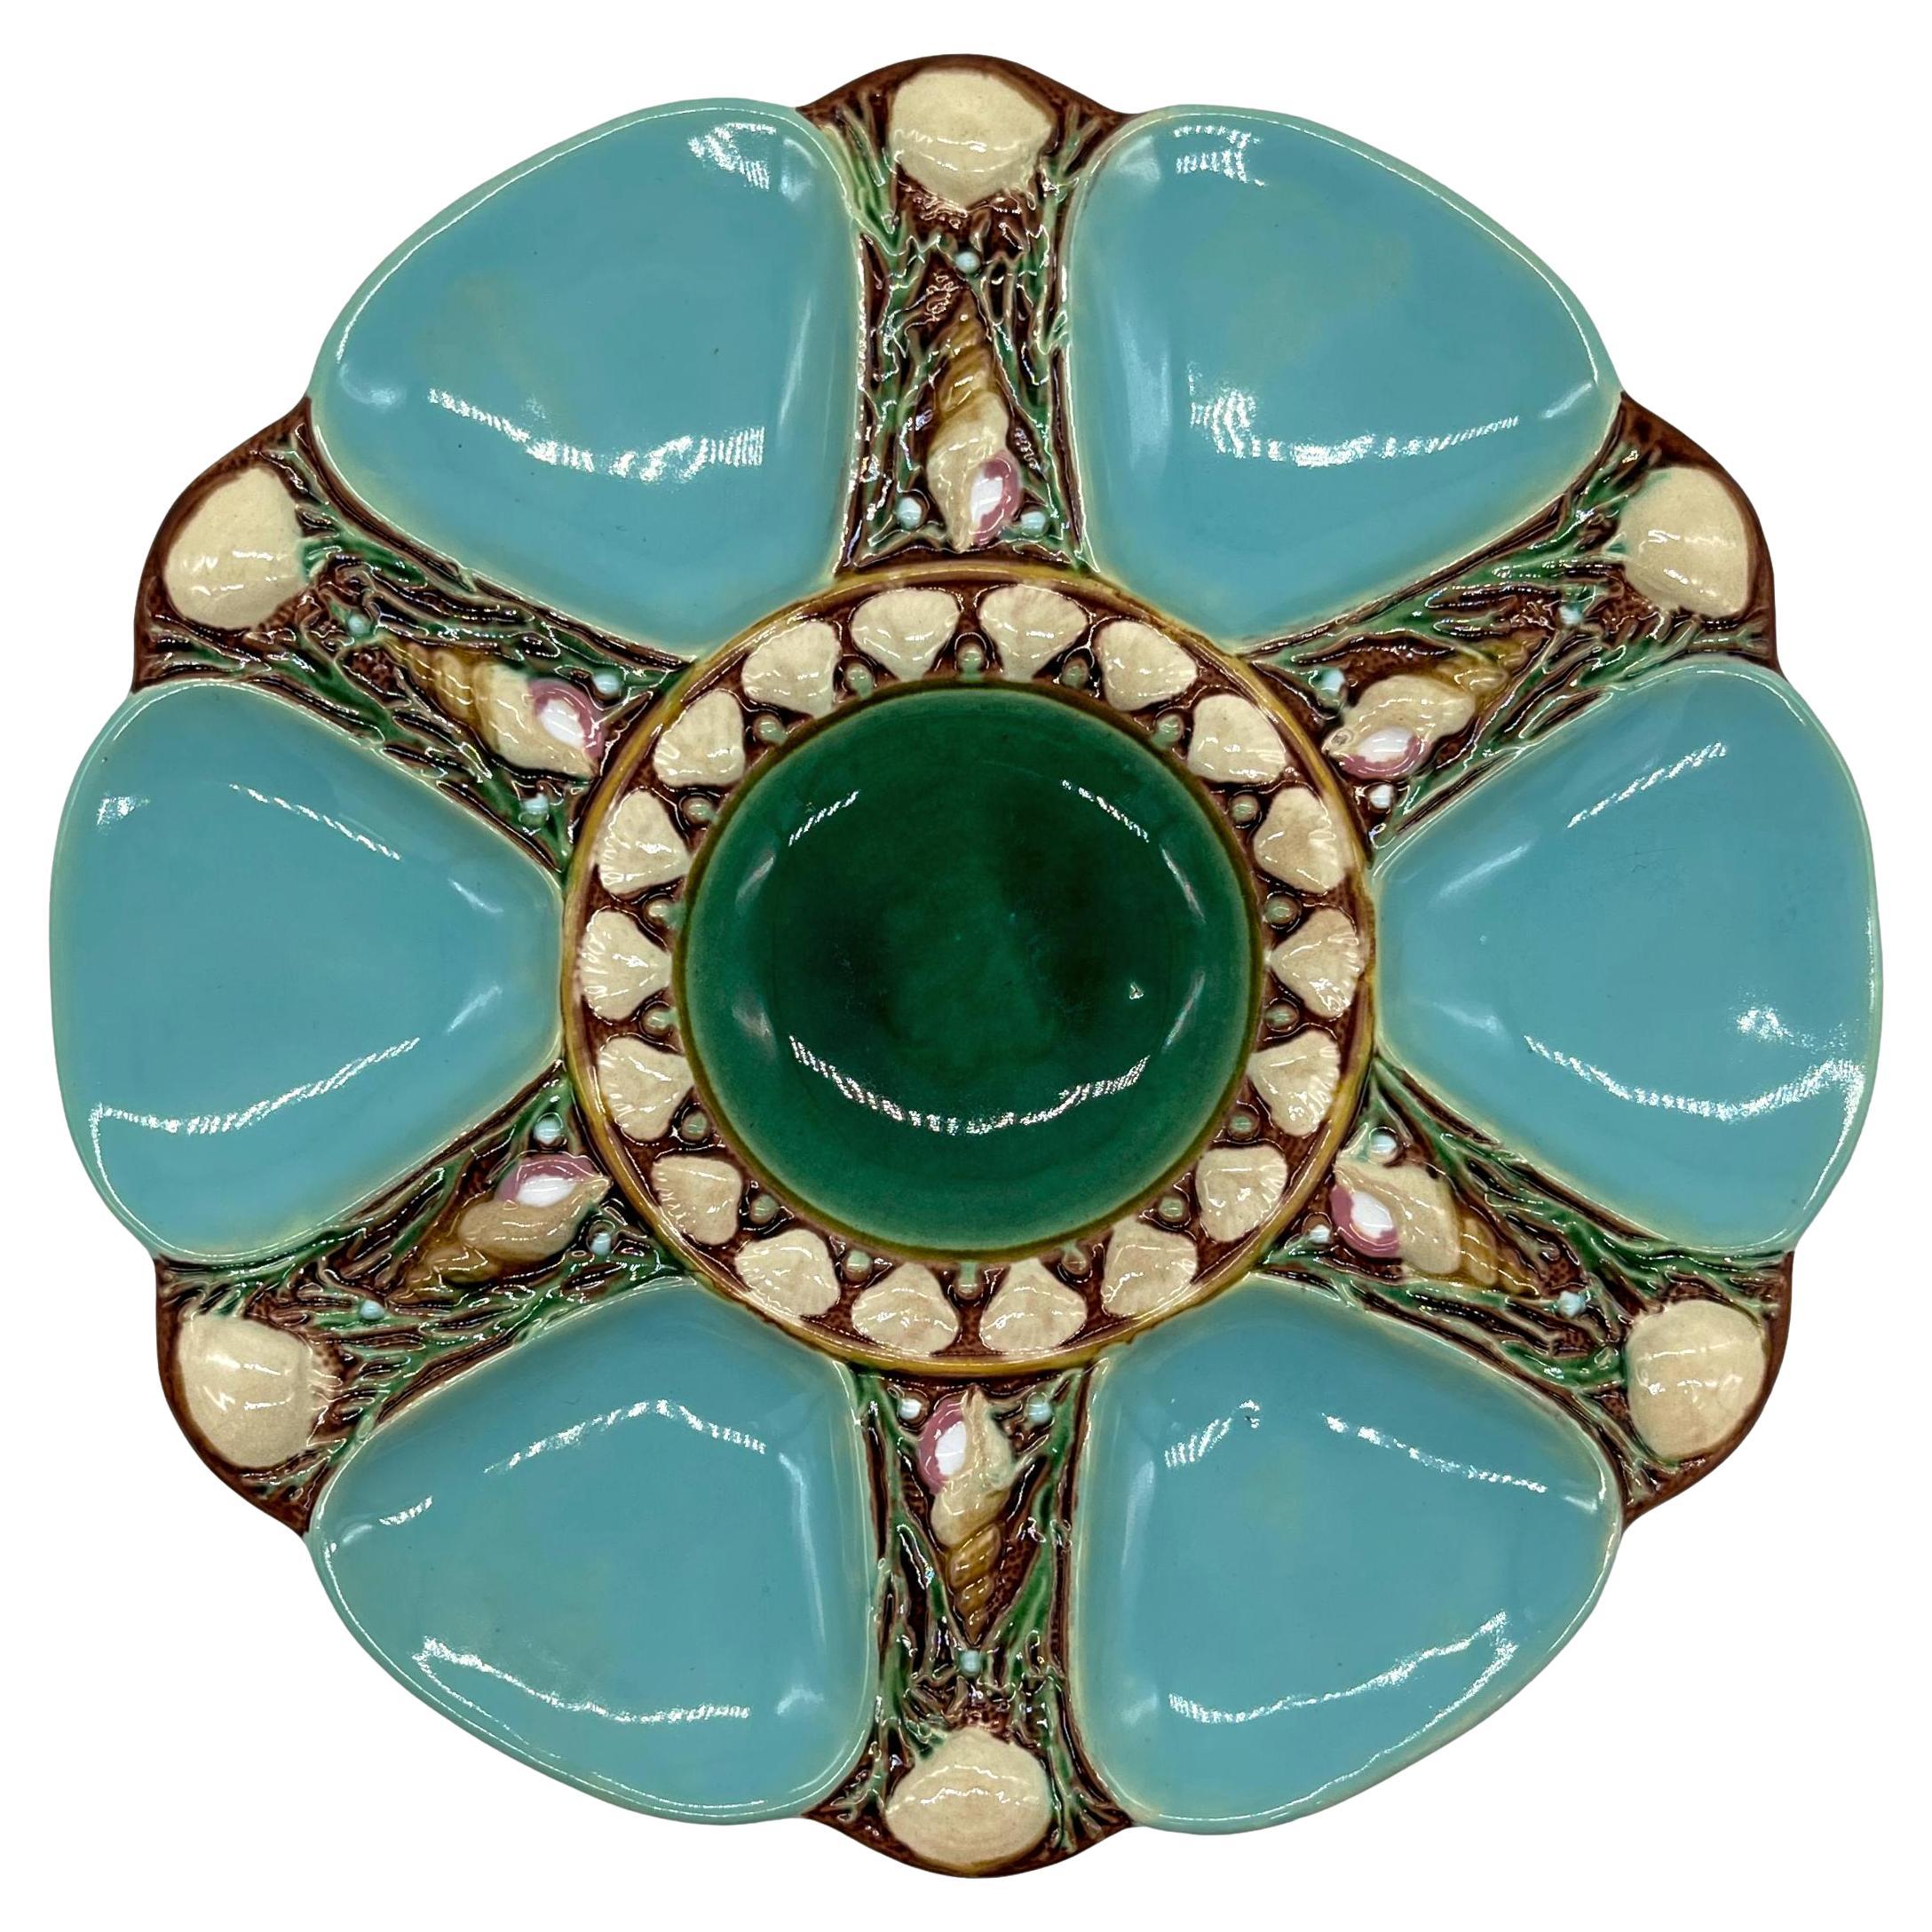 Minton Majolica Turquoise-Ground Oyster Plate, Shells and Seaweed, Dated 1873